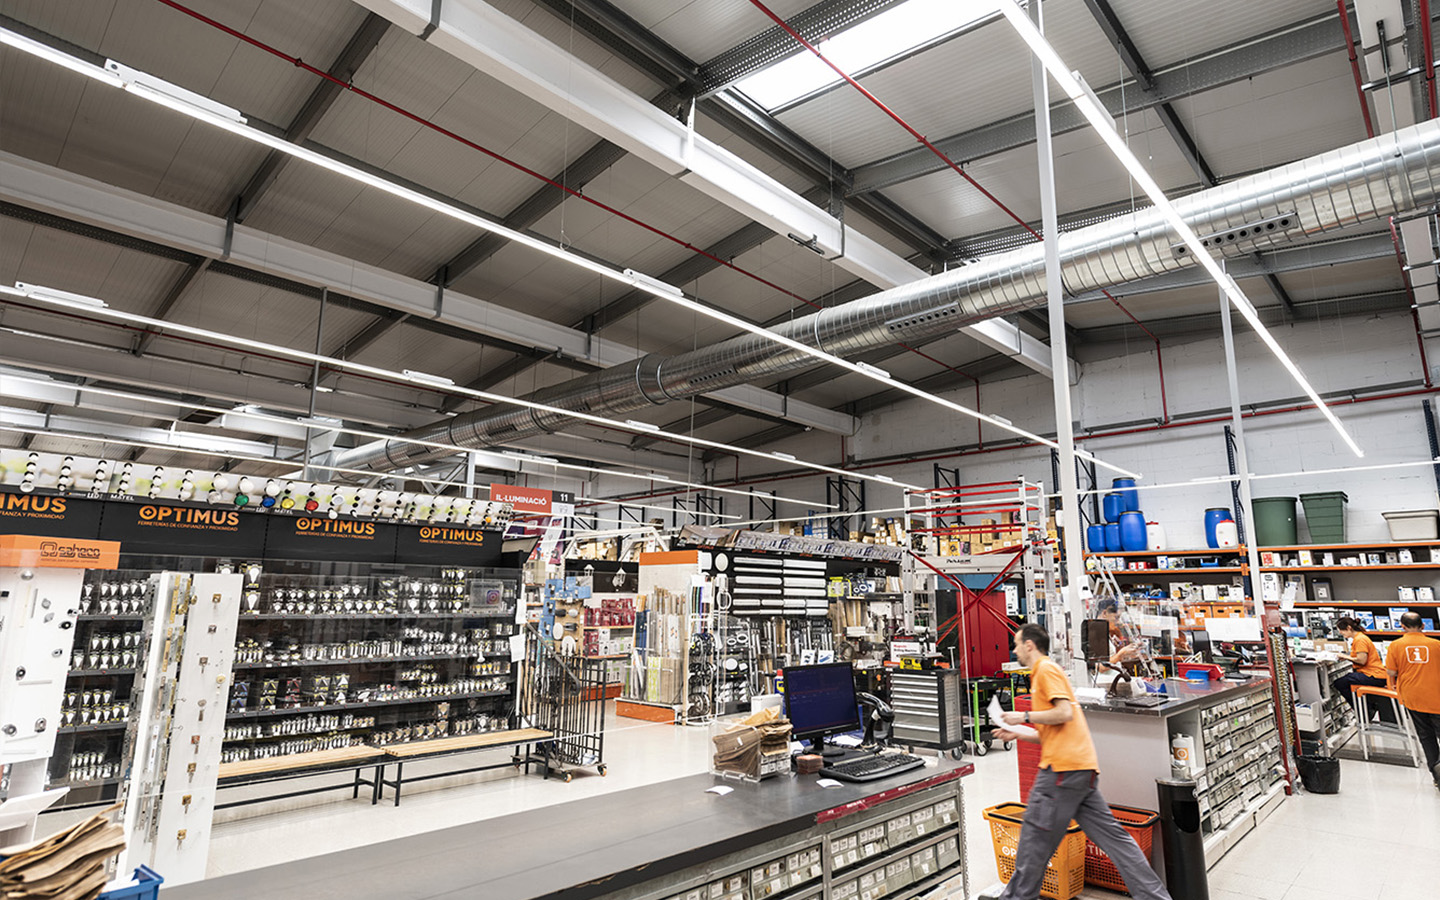 CANALED: Leader in industrial lighting in high-rise spaces